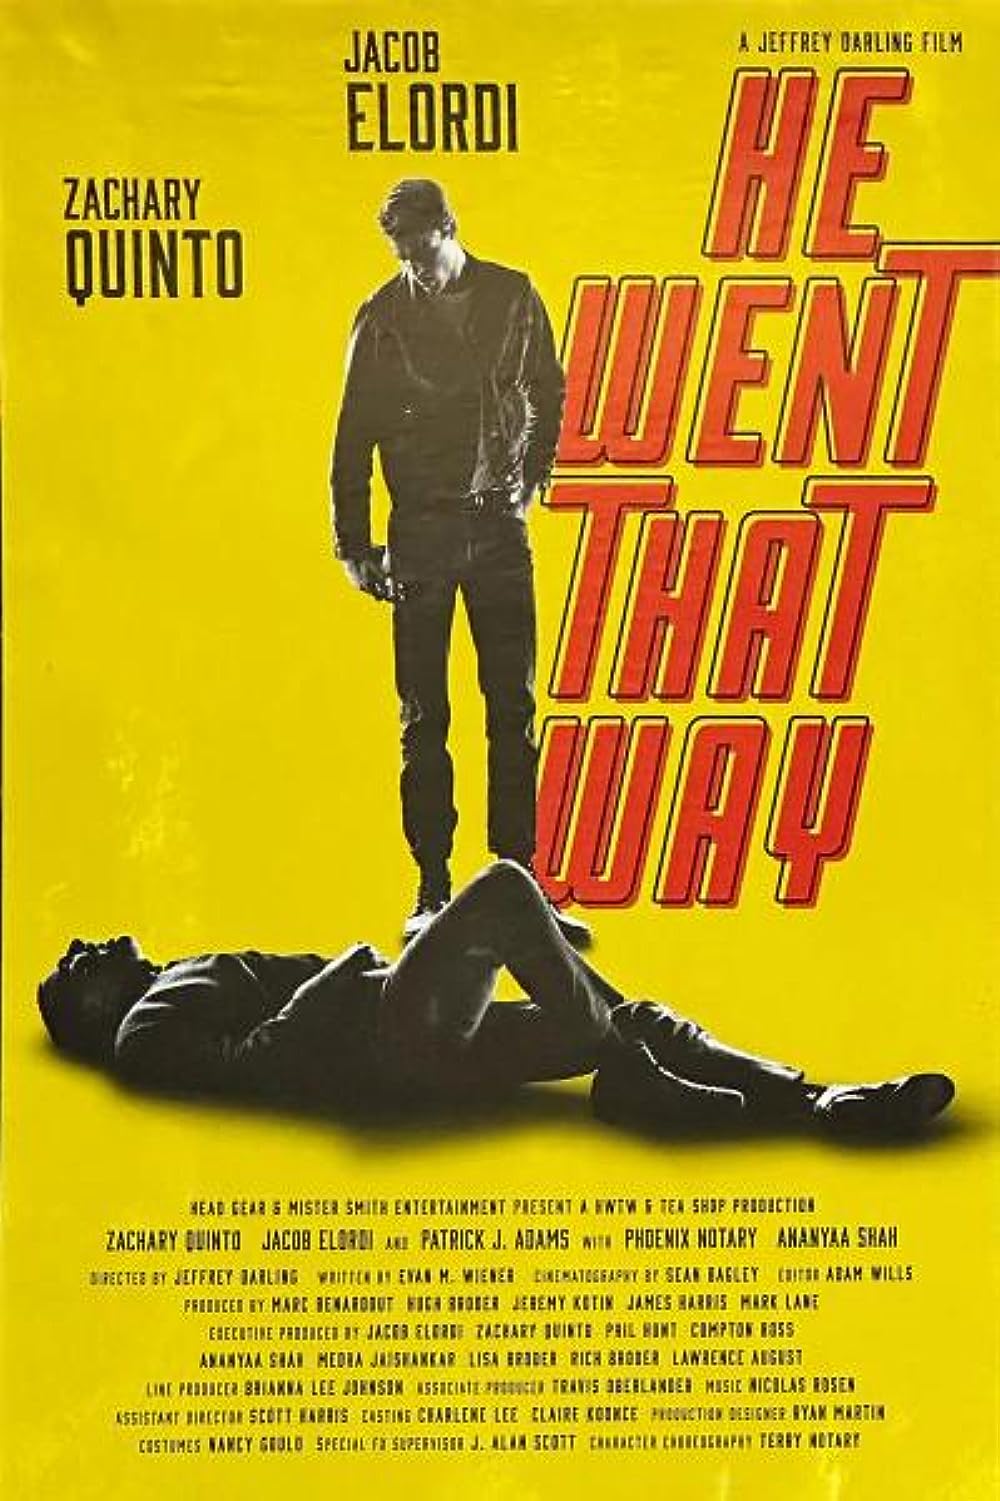 He Went That Way poster film Jacob Elordi 